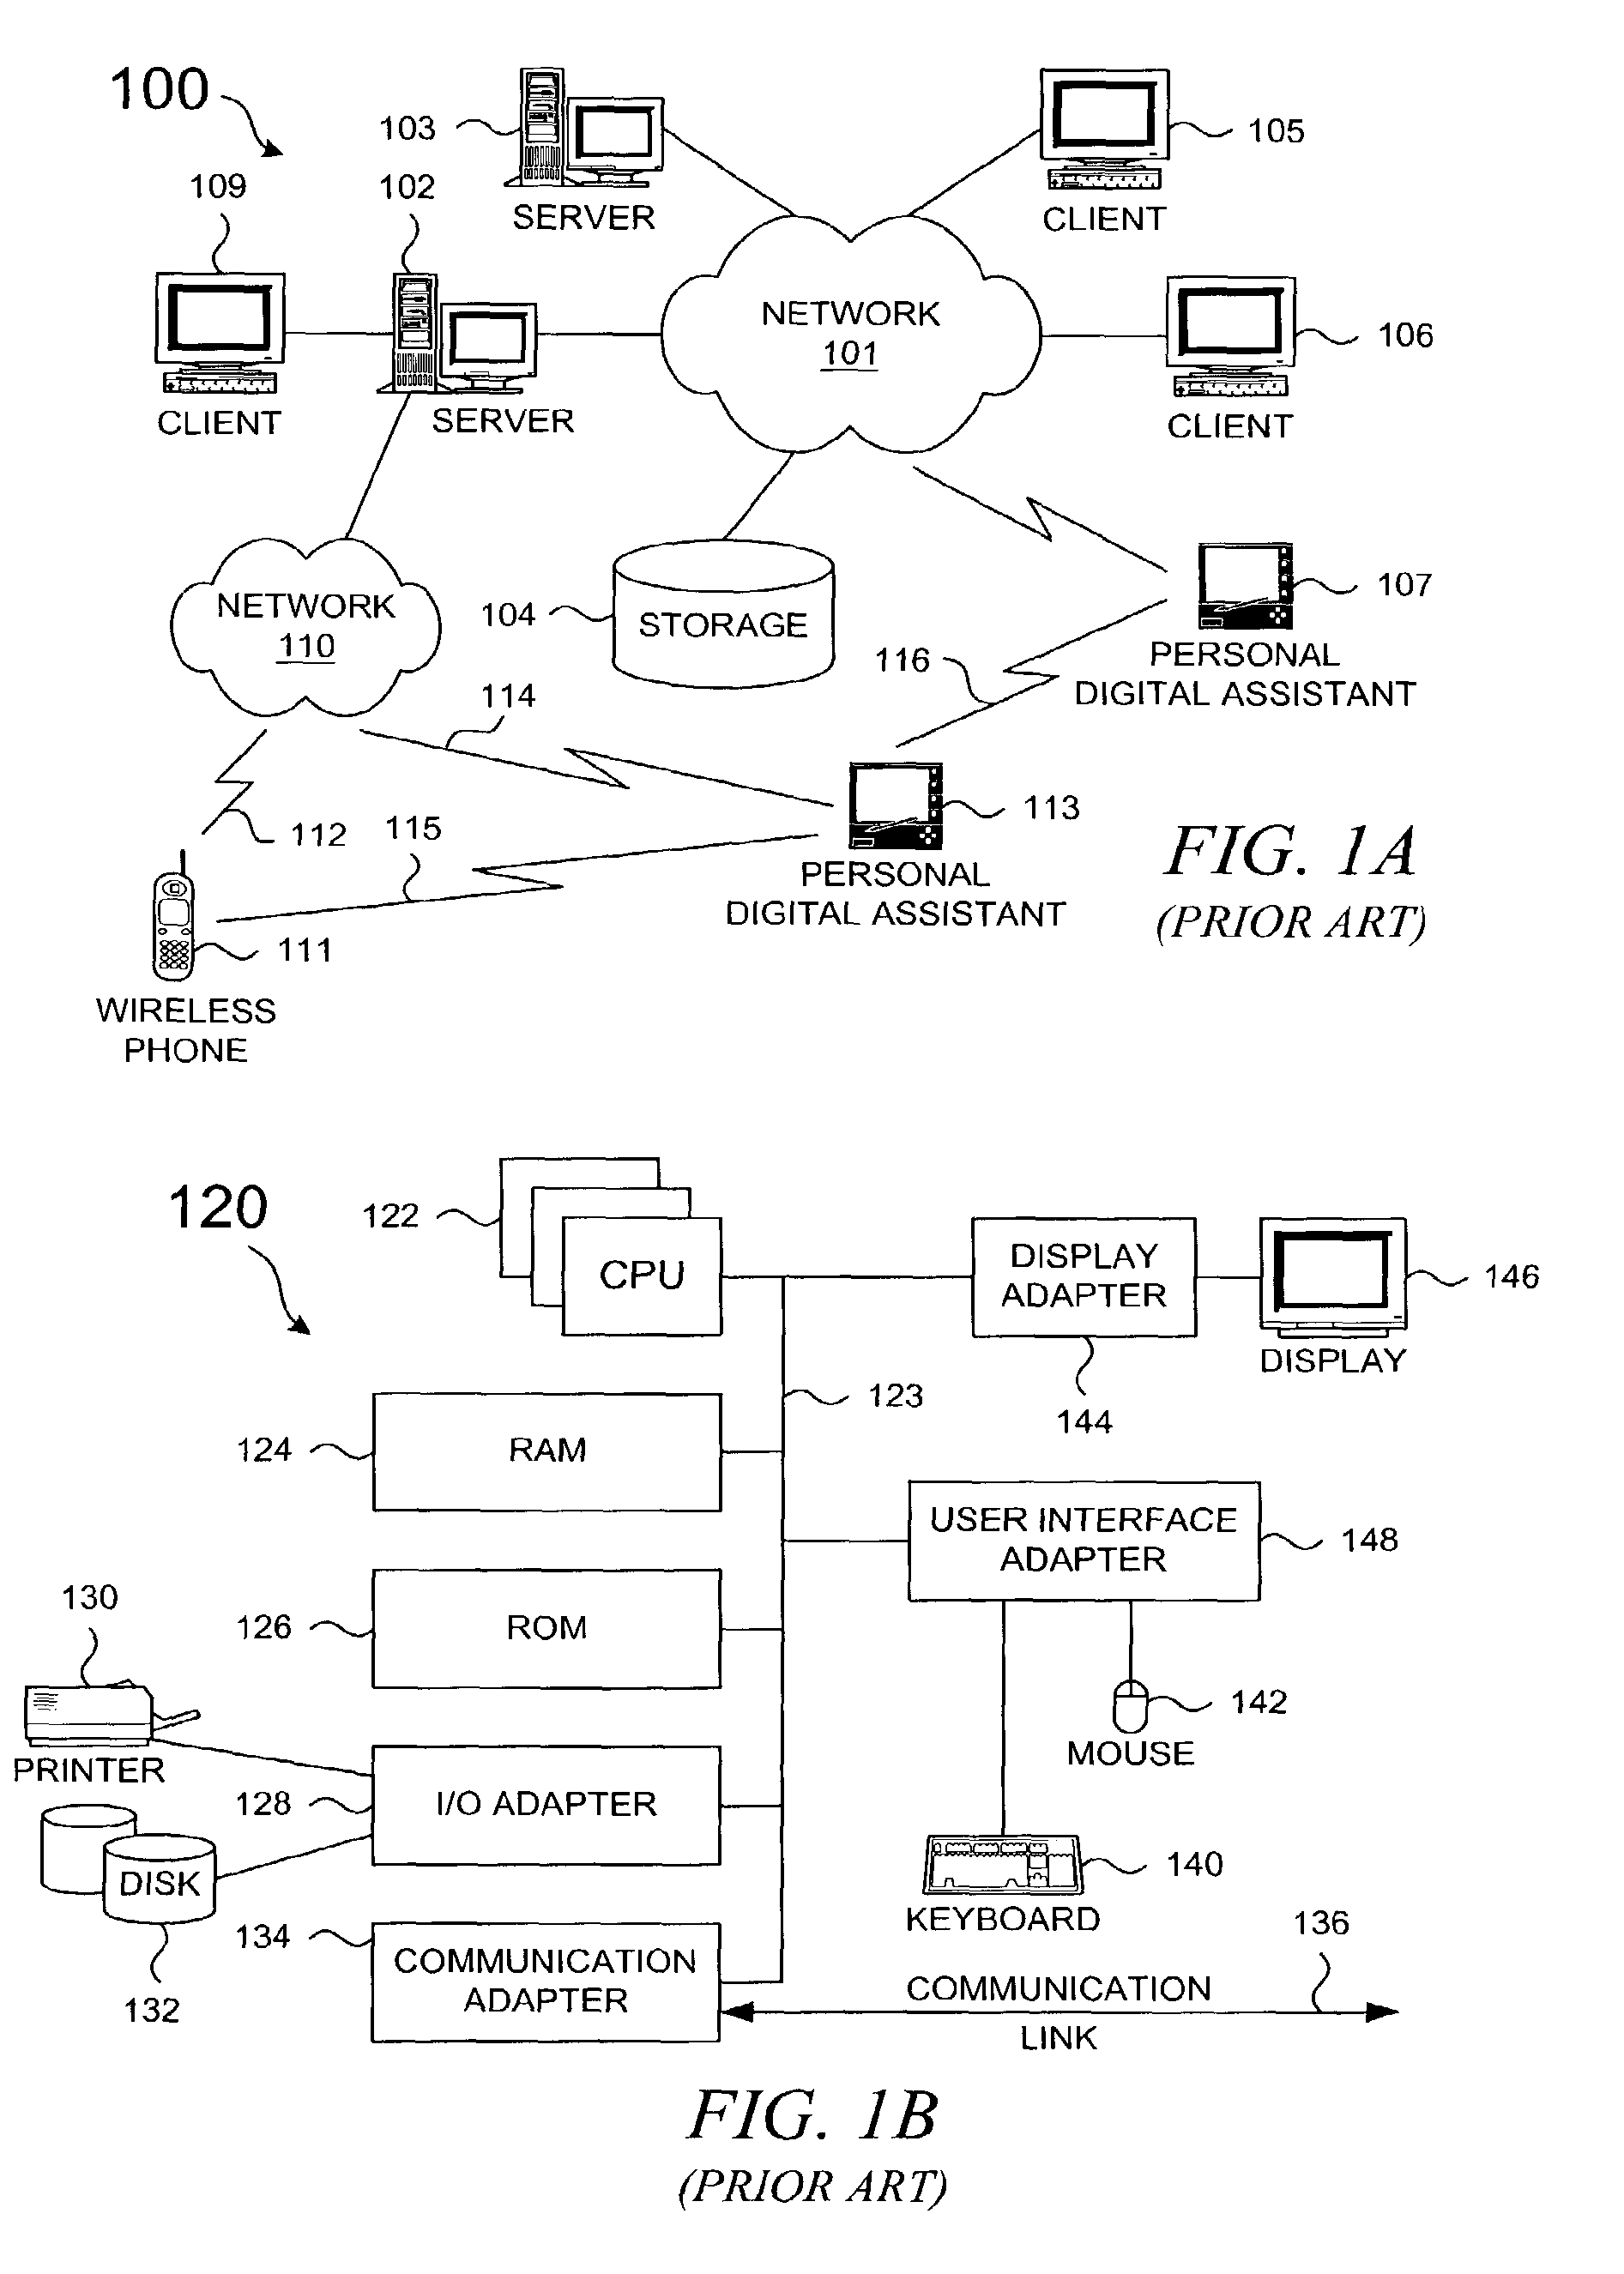 Method and system for native authentication protocols in a heterogeneous federated environment